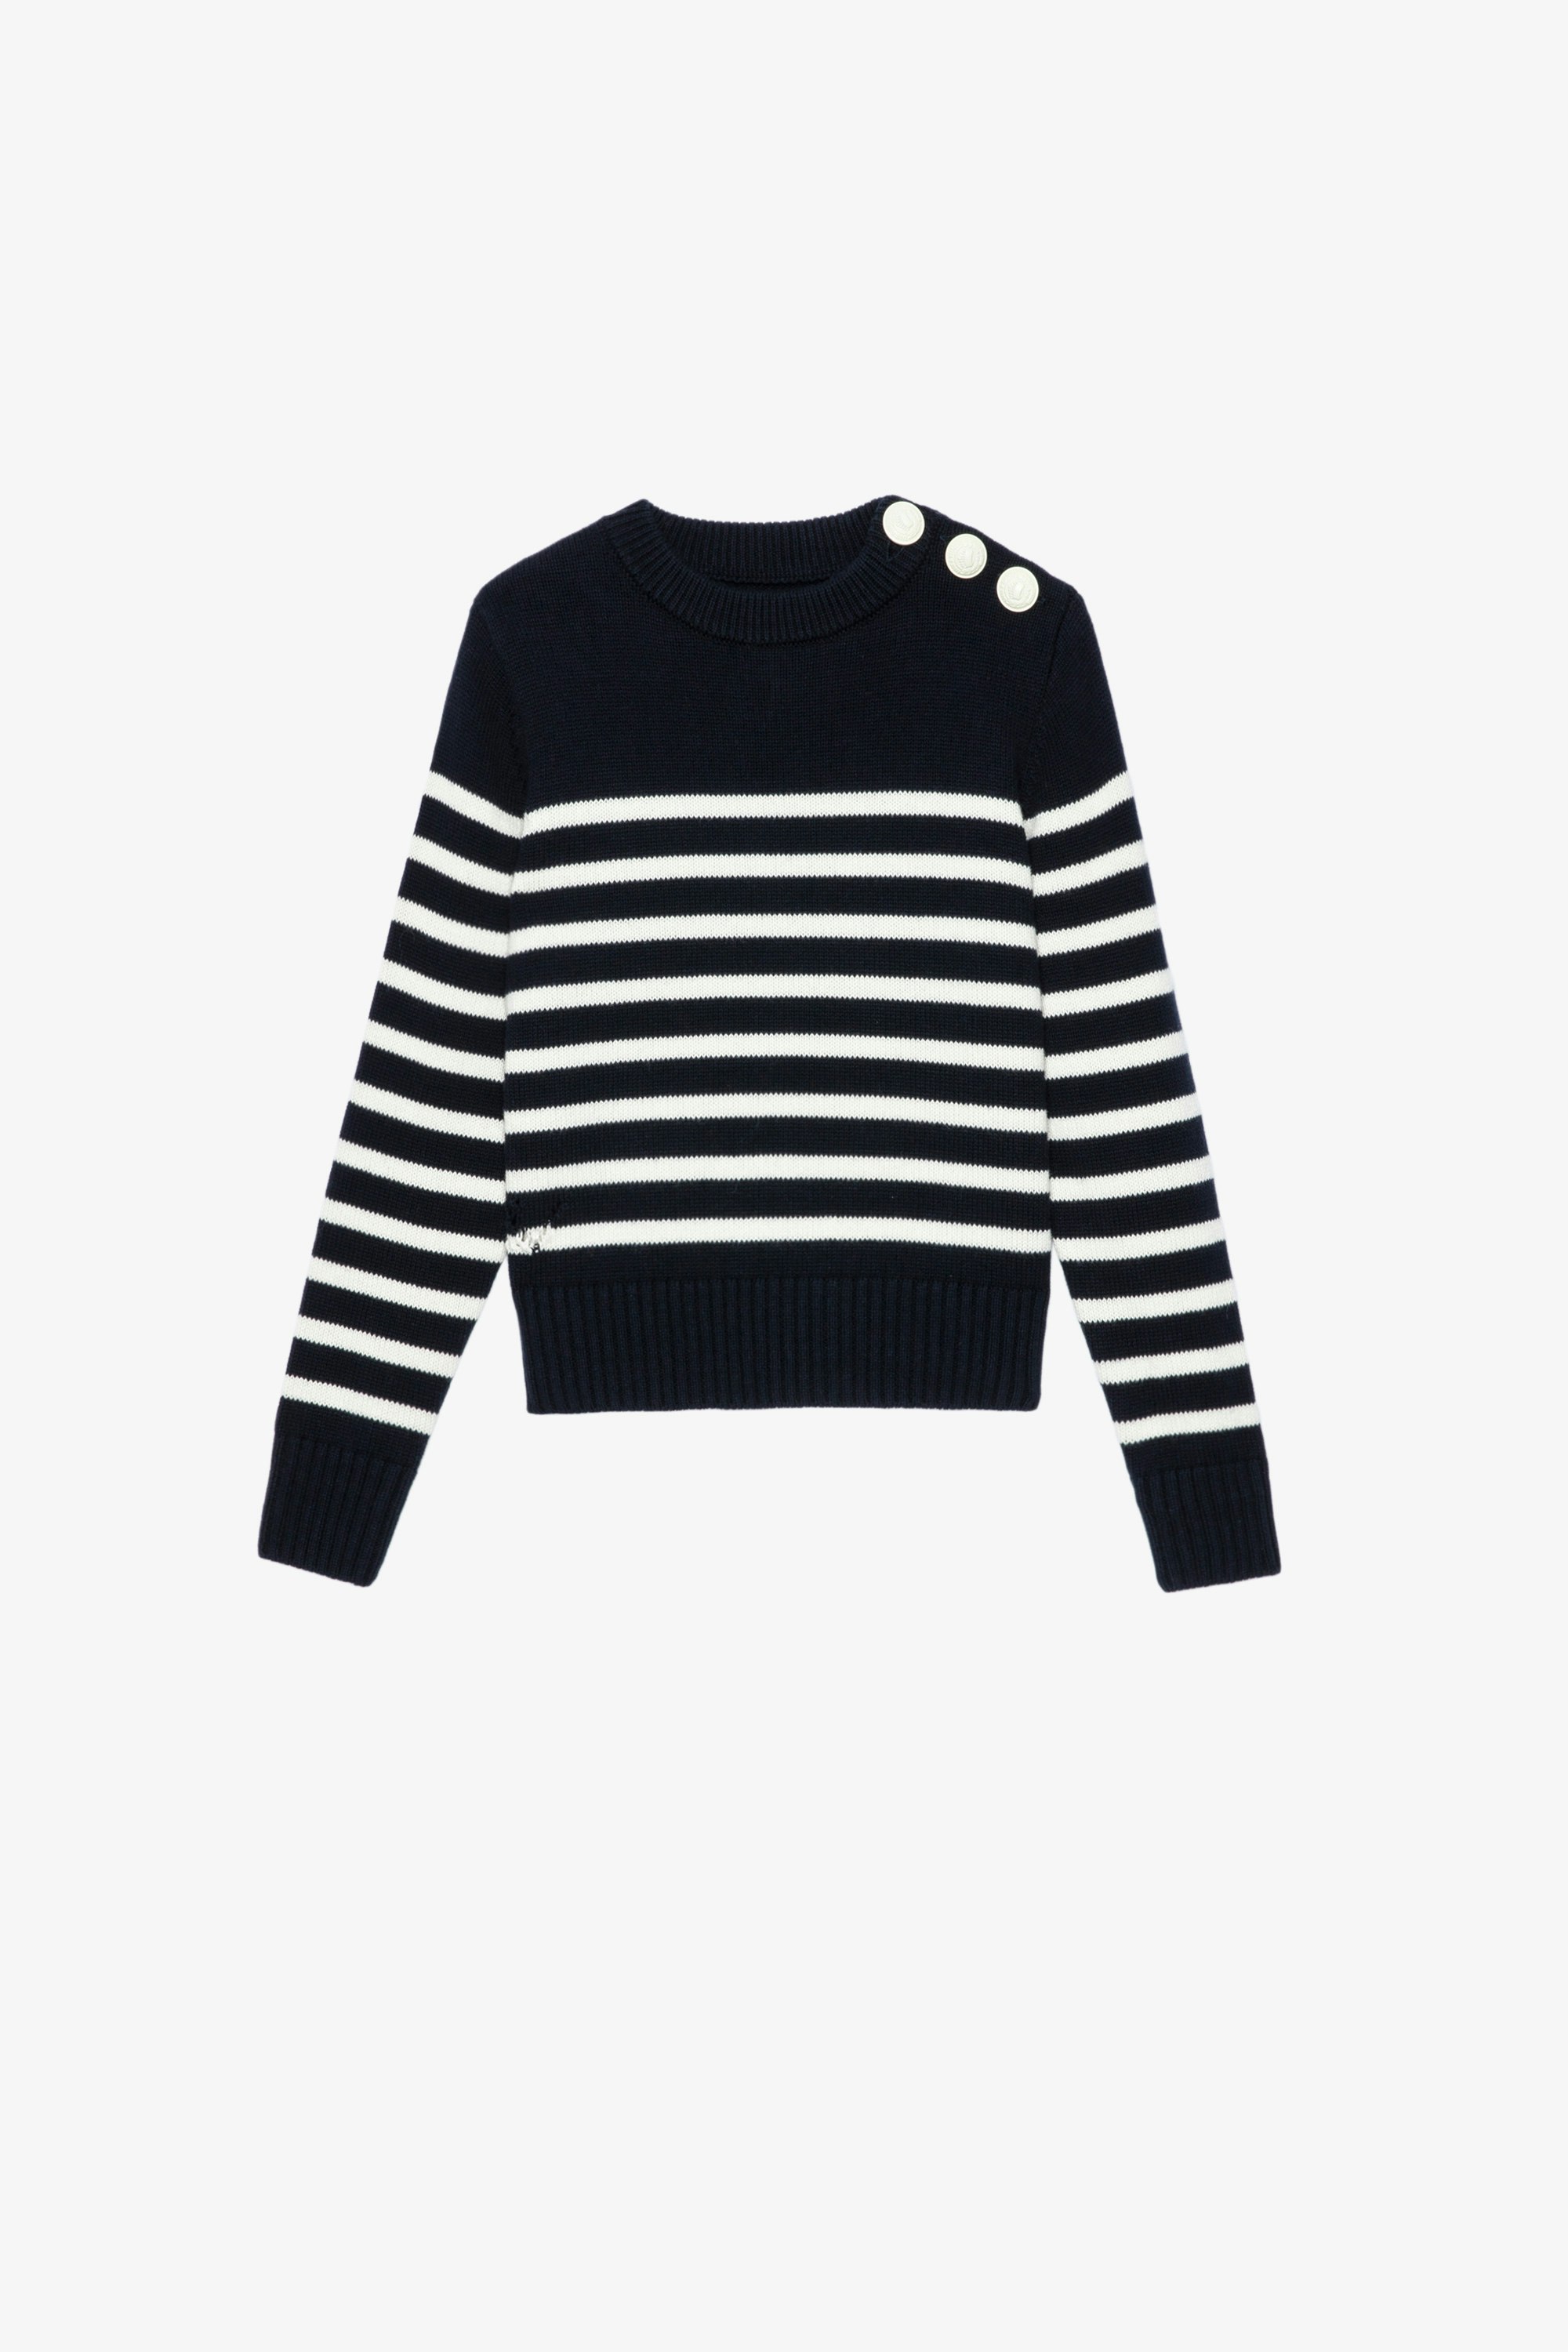 Suzane Kids' Sweater Kids’ navy-blue striped knit sweater featuring rhinestone-studded wings on the back